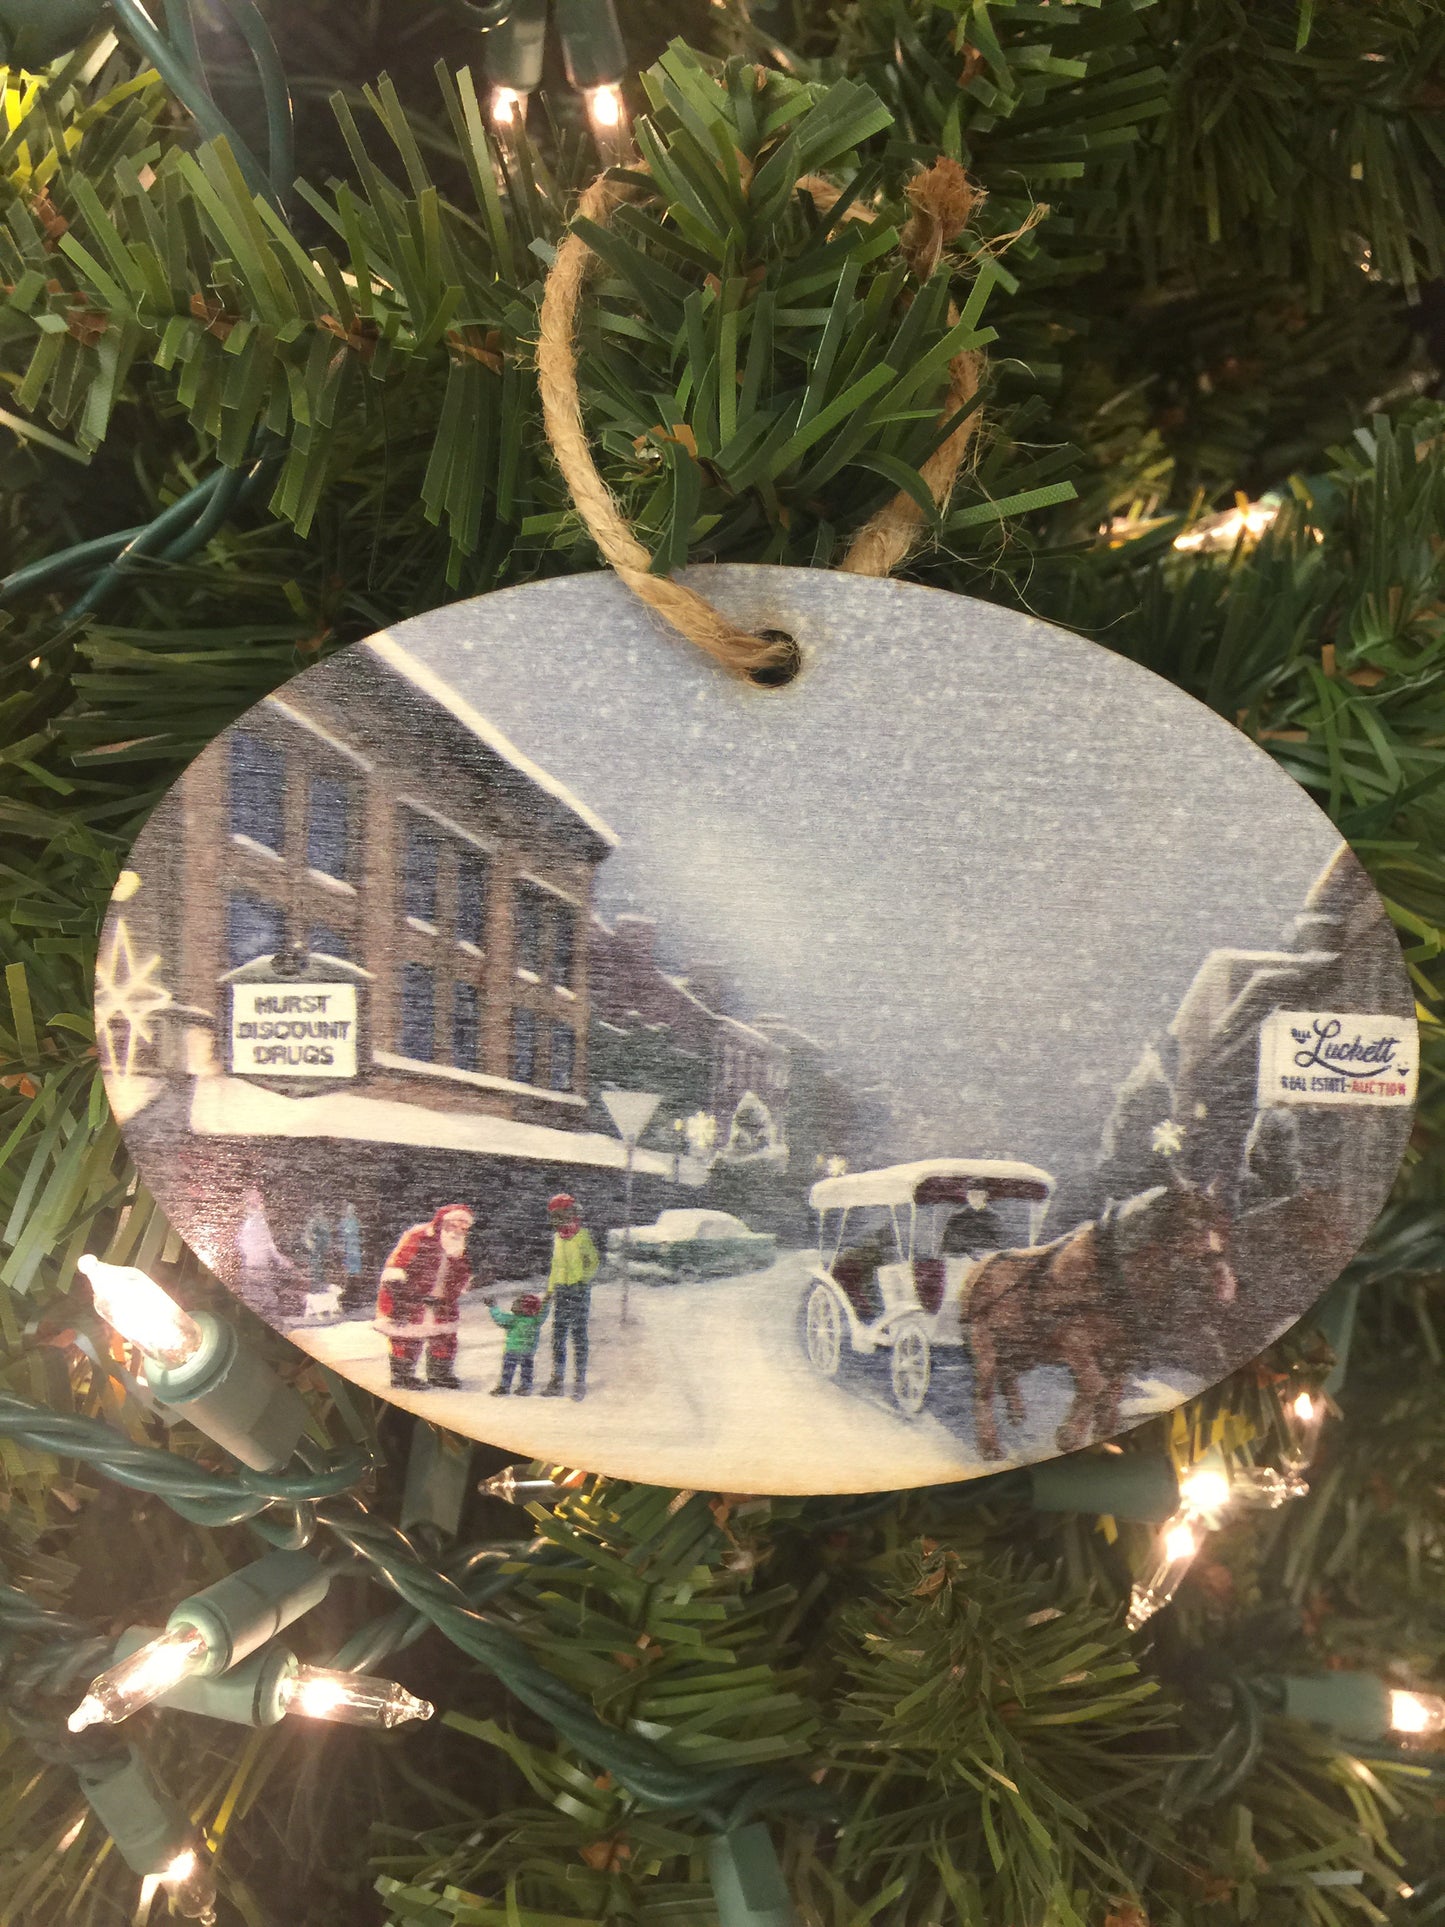 Wooden Downtown Bardstown ornament